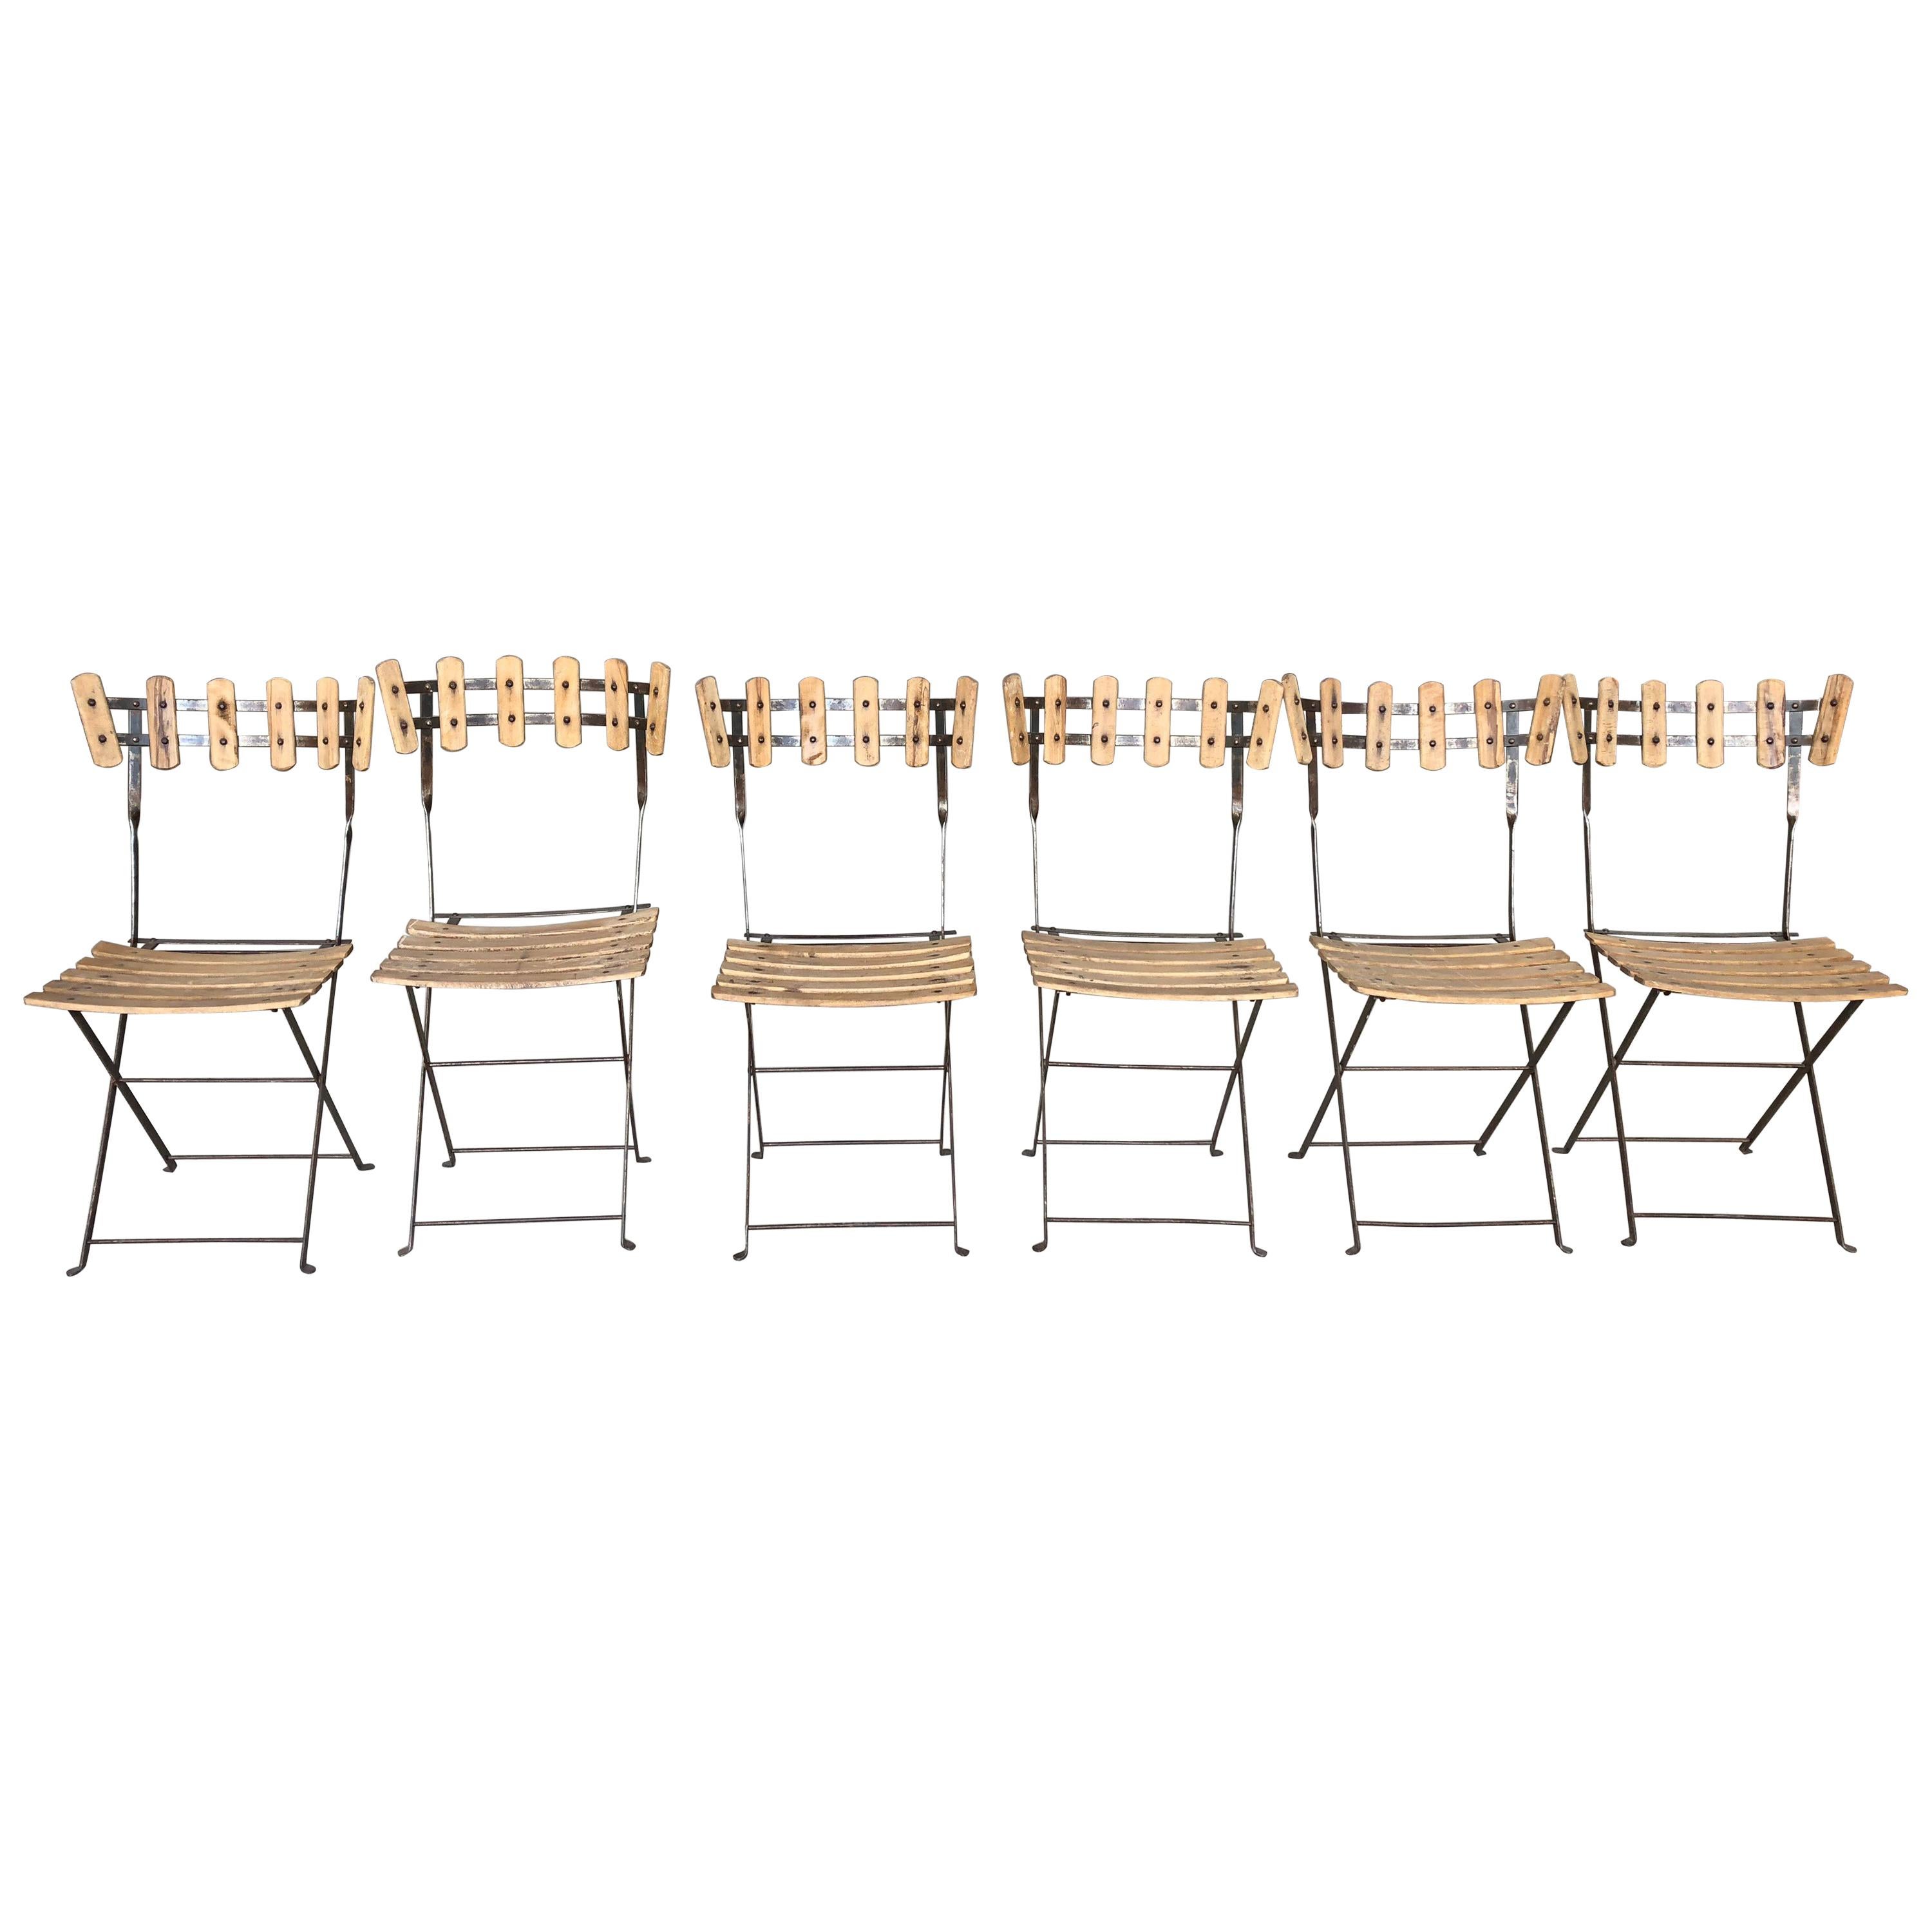 Vintage French Bistro Folding Chairs For Sale